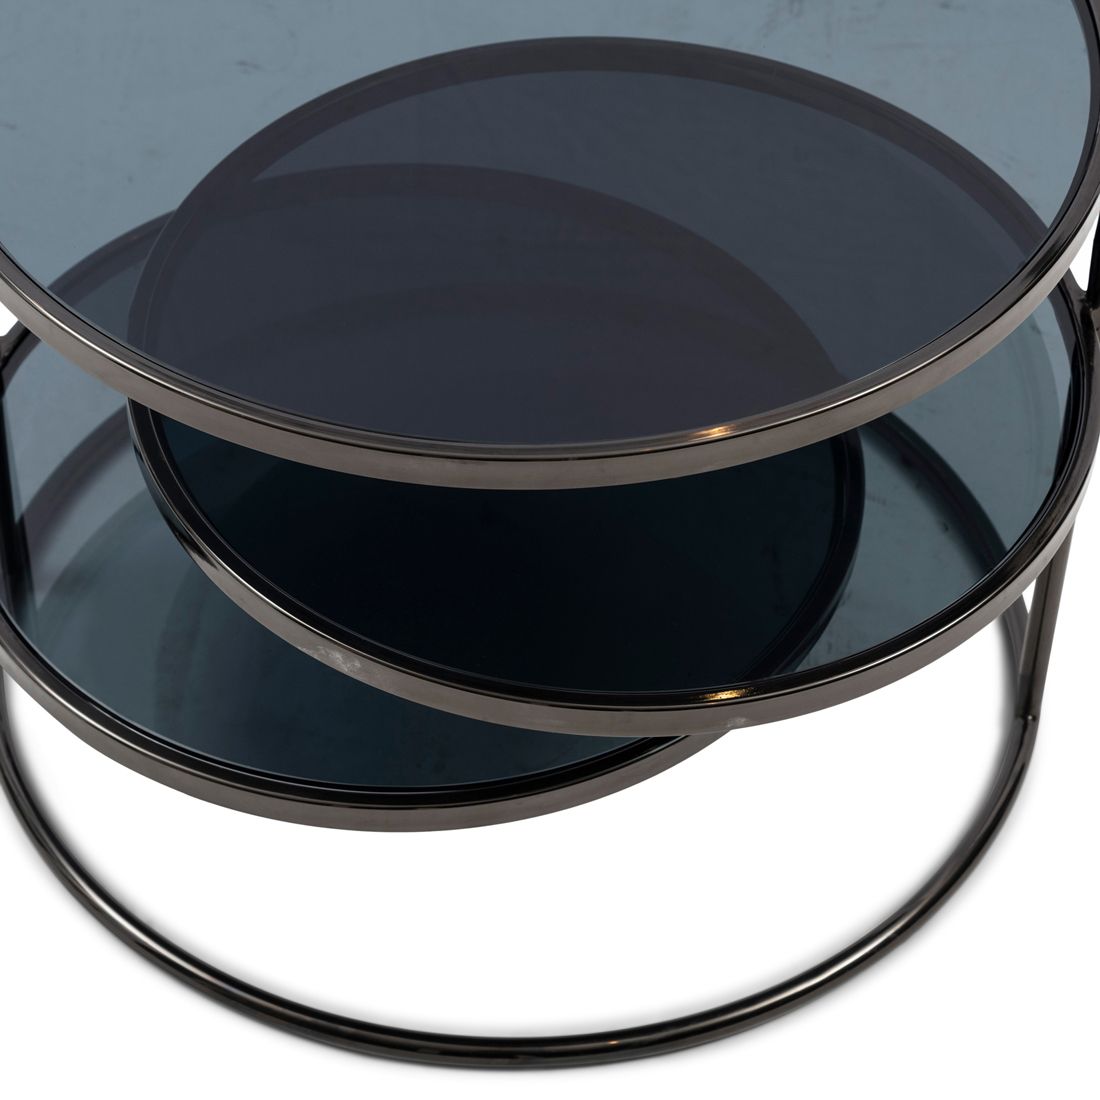 RIVIERA MAISON LIBERTY ROUND DOUBLE END TABLE IN BLACK